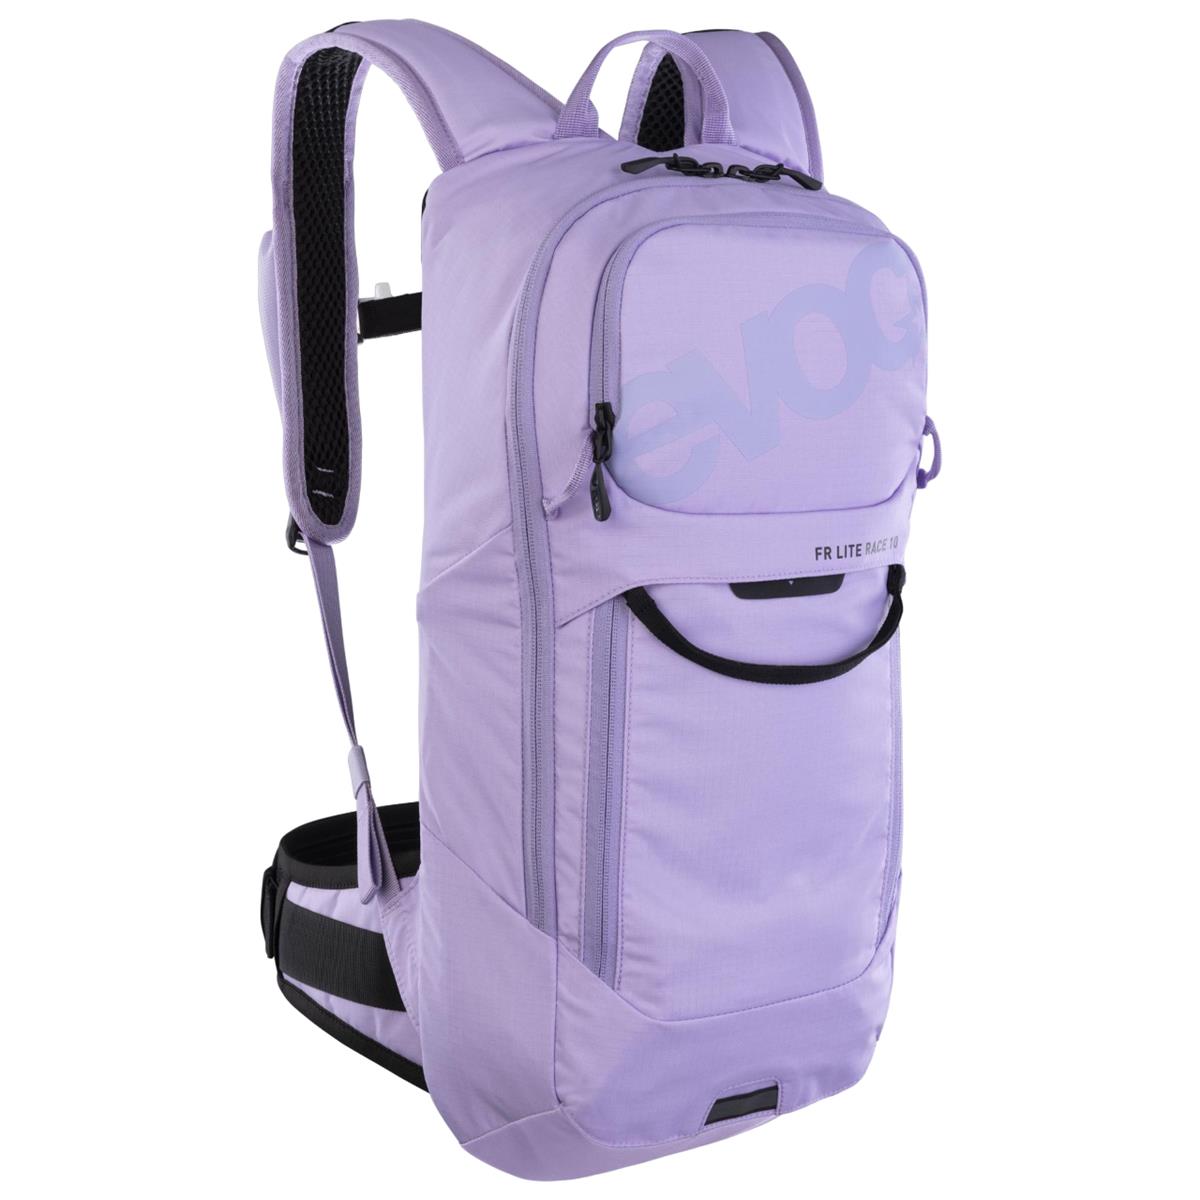 FR LITE RACE 10 Backpack With Back Protector 10L Purple Size M/L